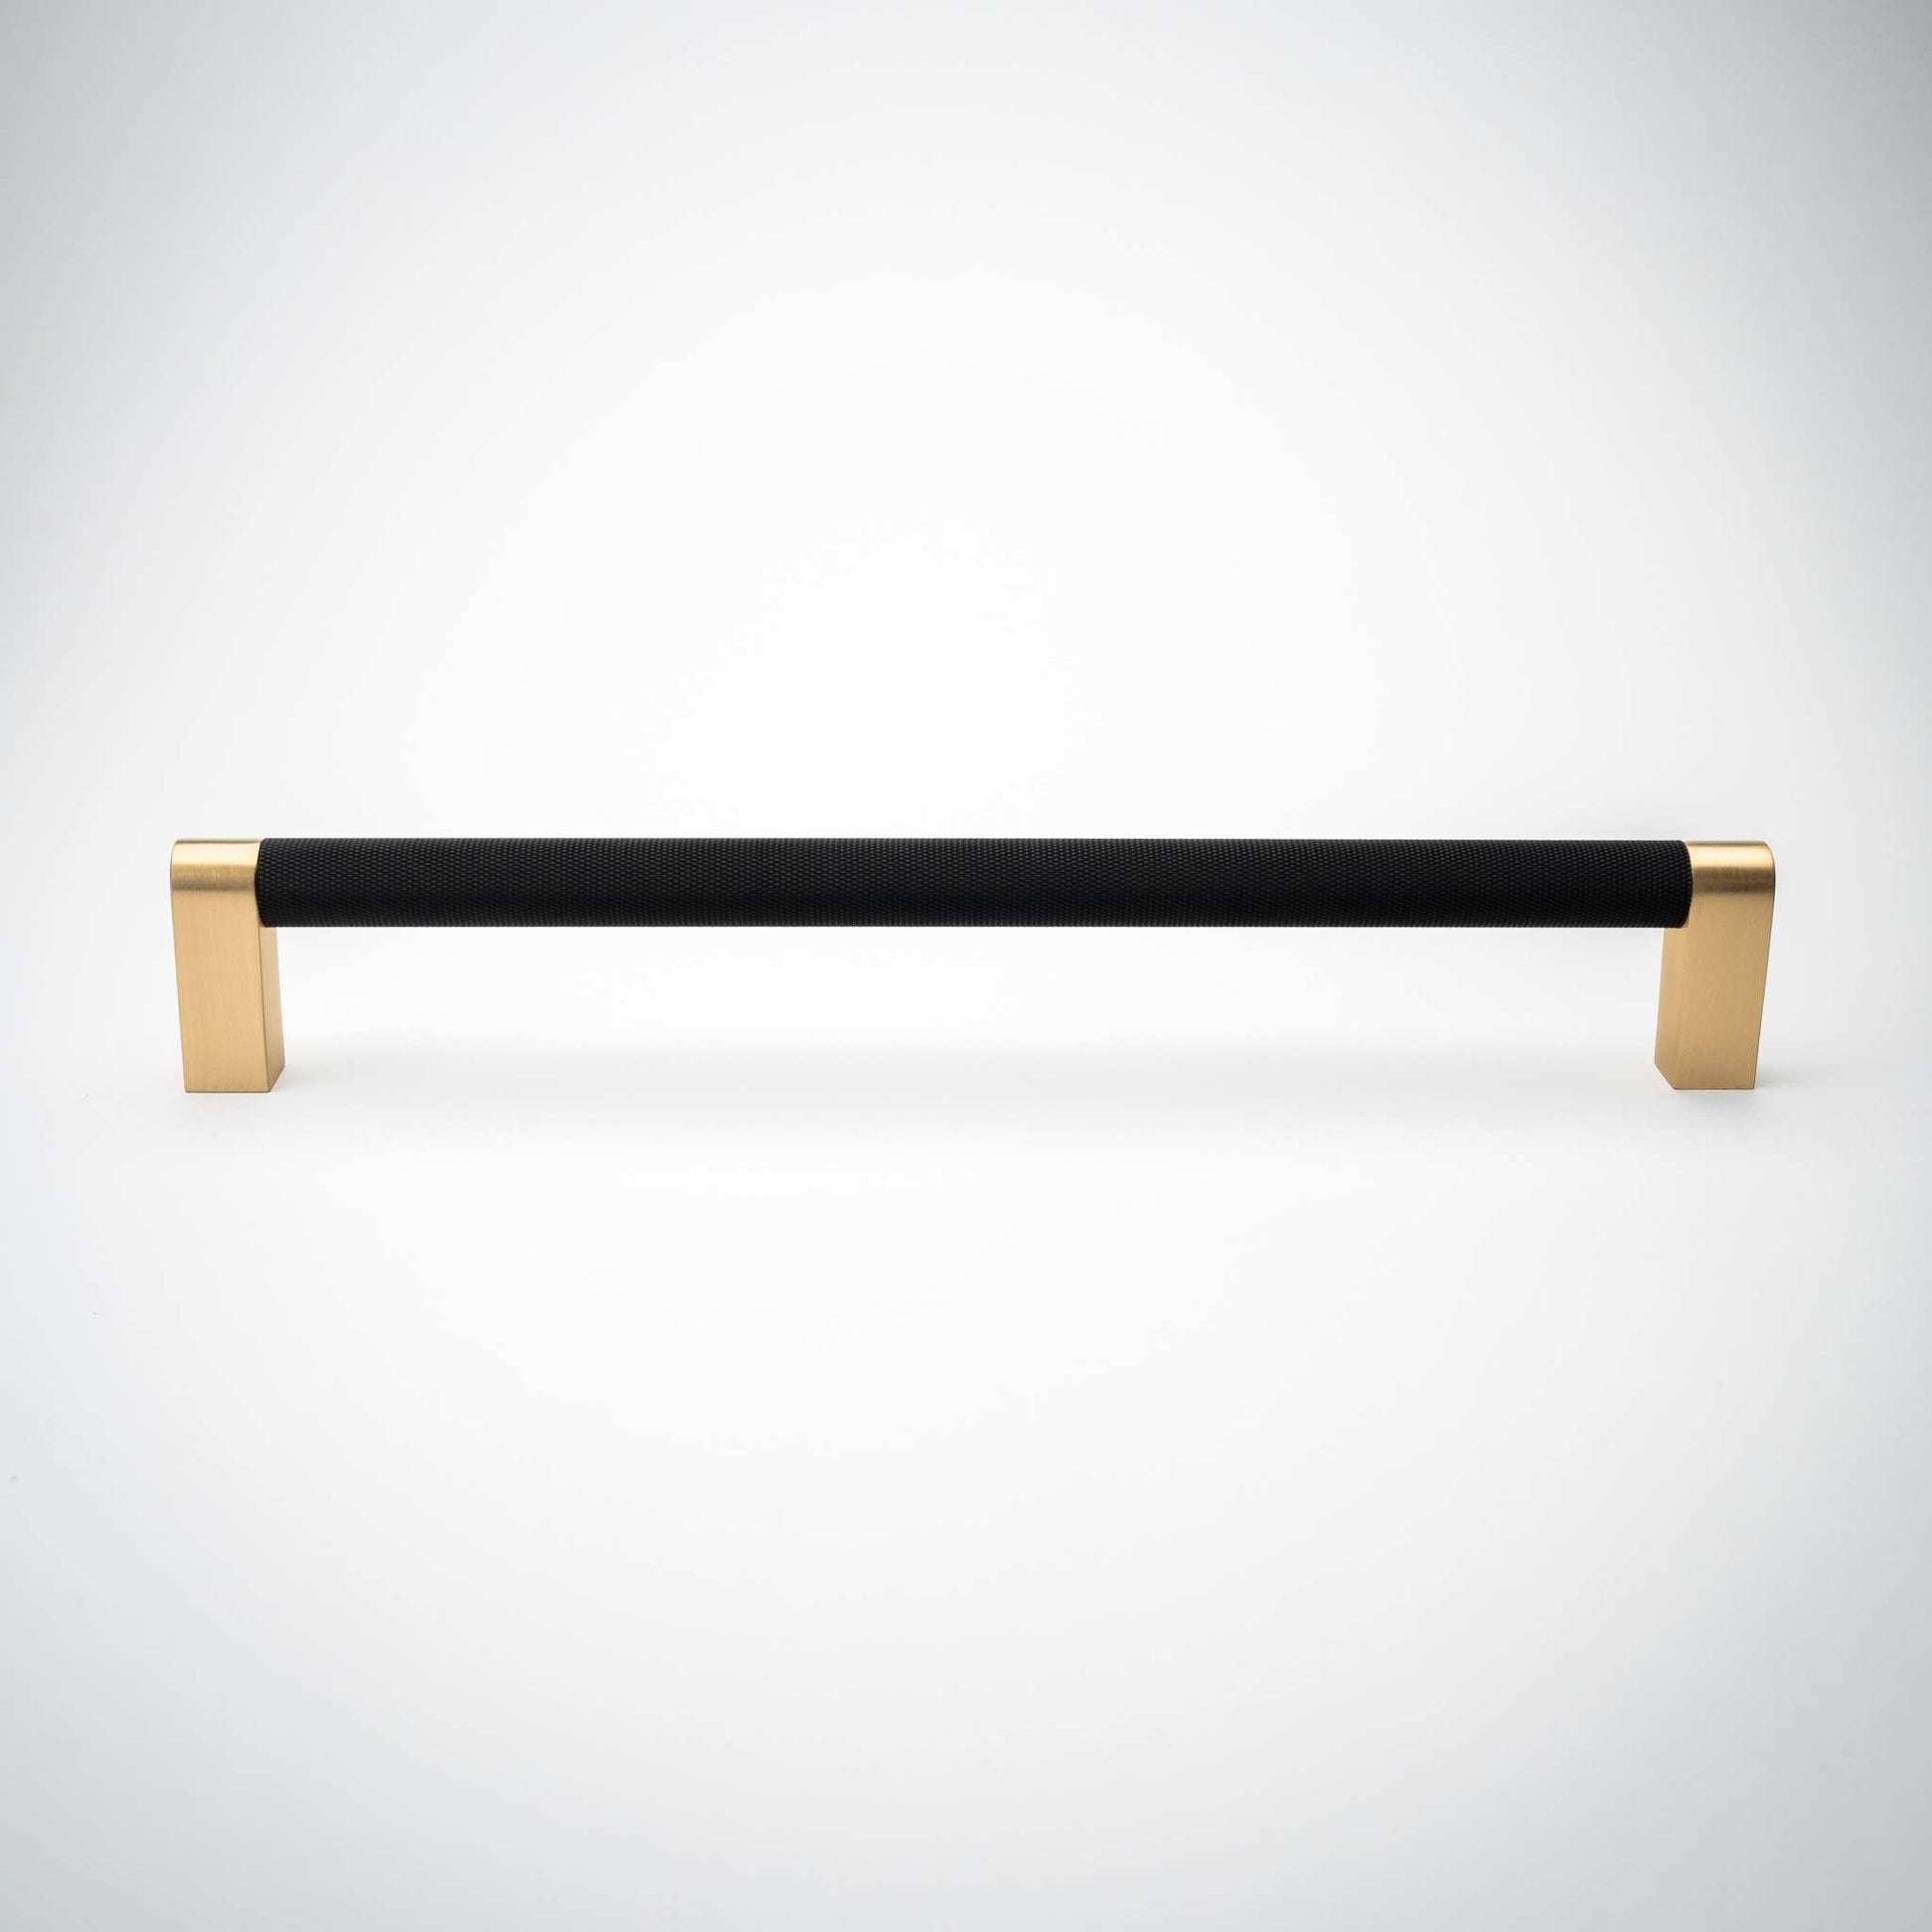 Bold, Black & Gold Knurled Solid Brass Appliance Pulls


Go BOLD in your home!Our Bold, Black and "gold" appliance pull brings a modern feel to your cabinetry. Its two-toned style is visually fresh, while its knurled maappliance pullBold, Black & Gold Knurled Solid Brass Appliance Pulls